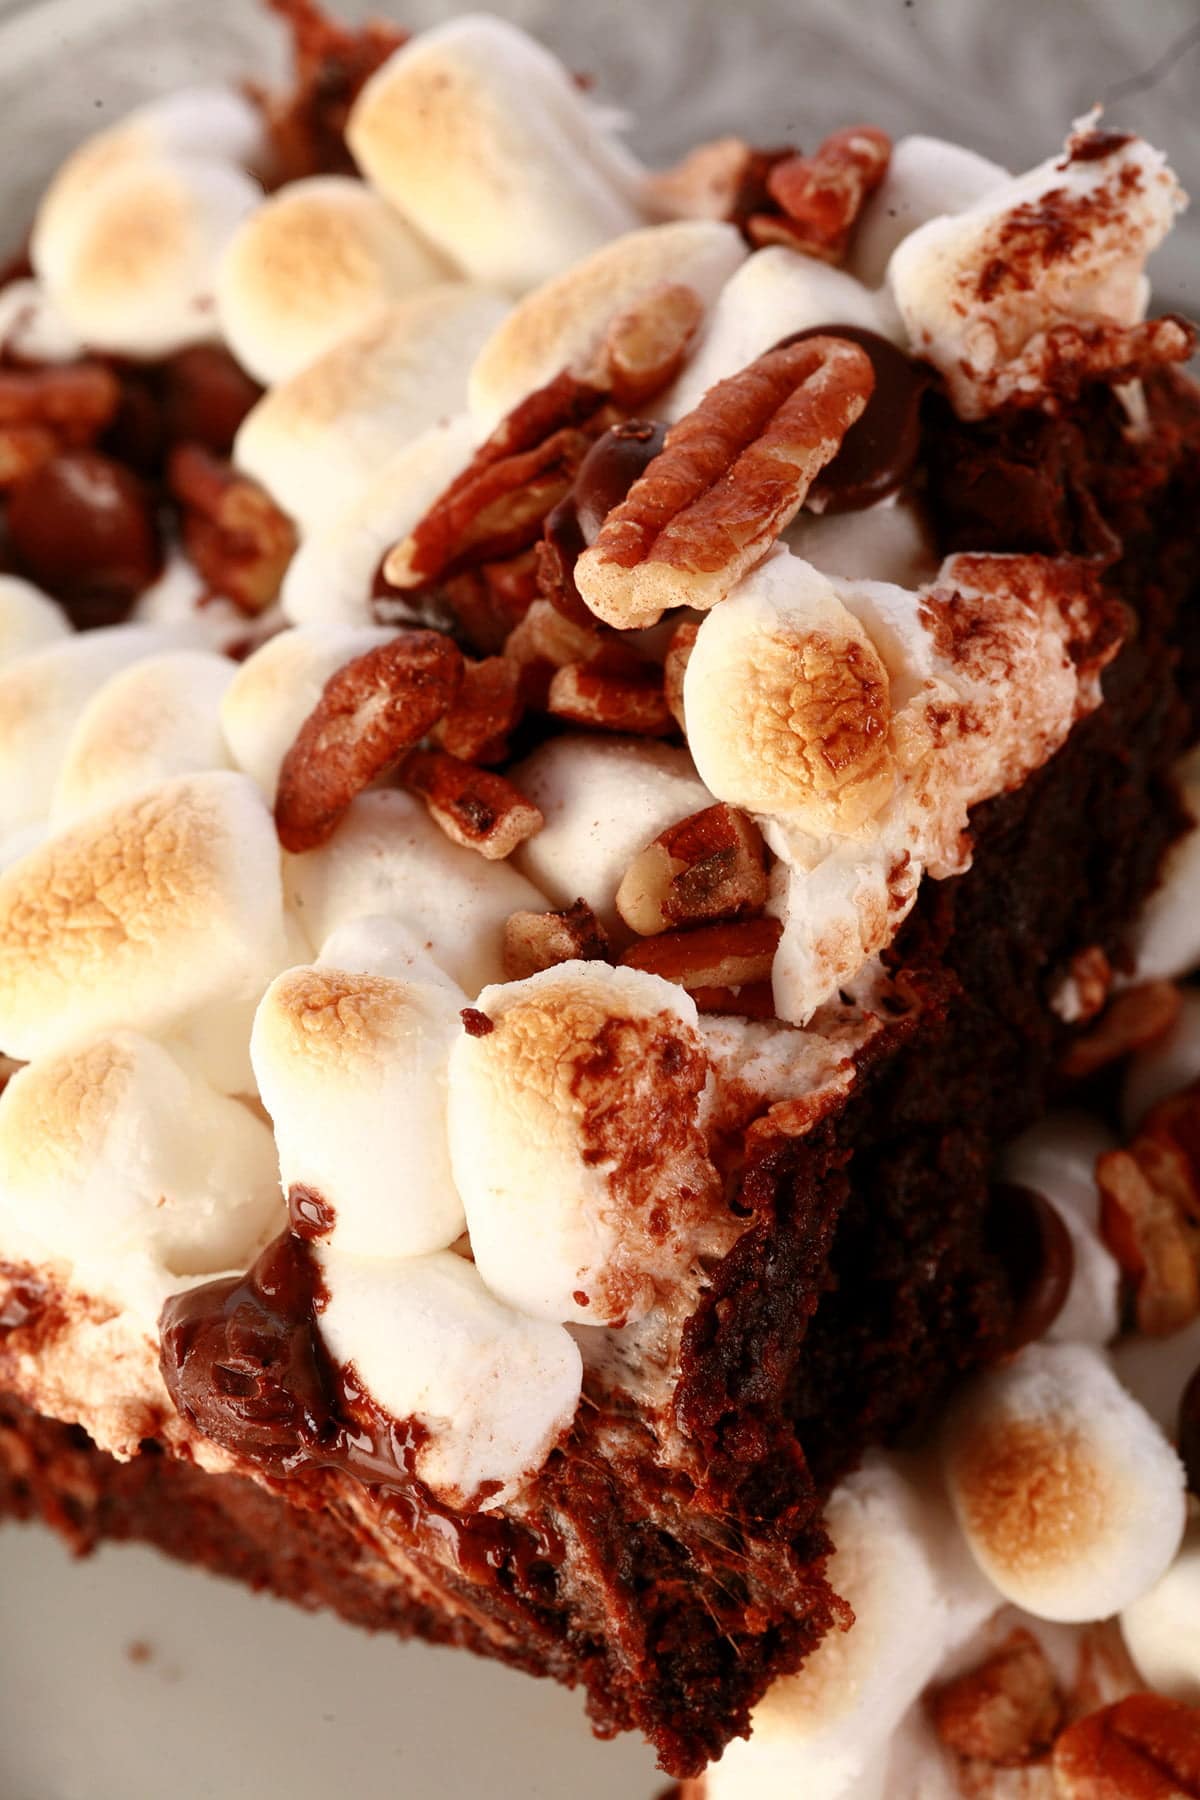 A close up view of two rocky road brownies - double chocolate walnut brownies with toasted mini marshmallows, chocolate chips, and chopped pecans on top.